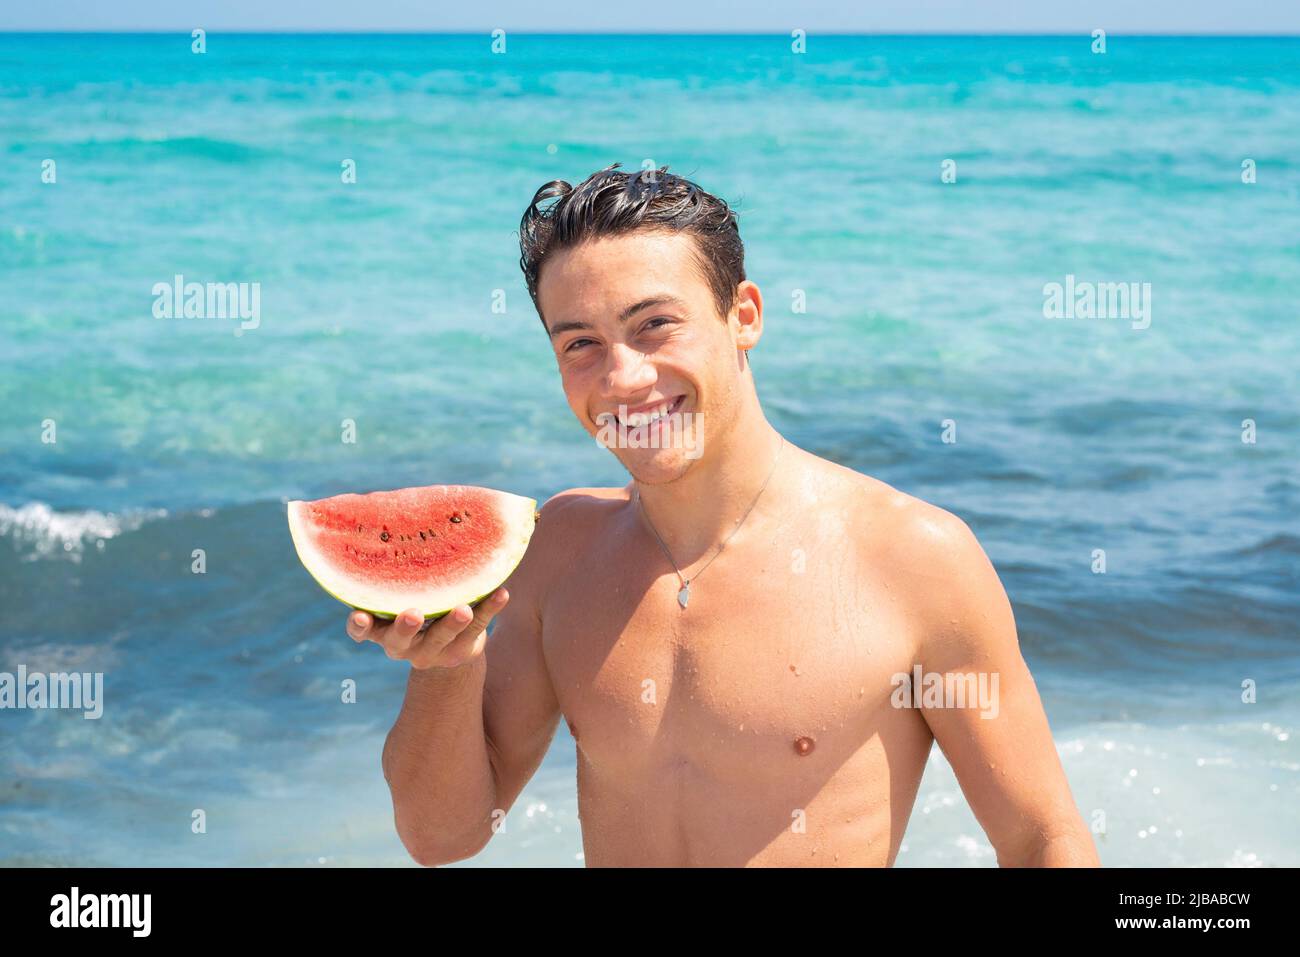 Young fit body boy portrait holding red fresh watermelon with blue ocean water in background. Summer holiday vacation season concept lifestyle people Stock Photo